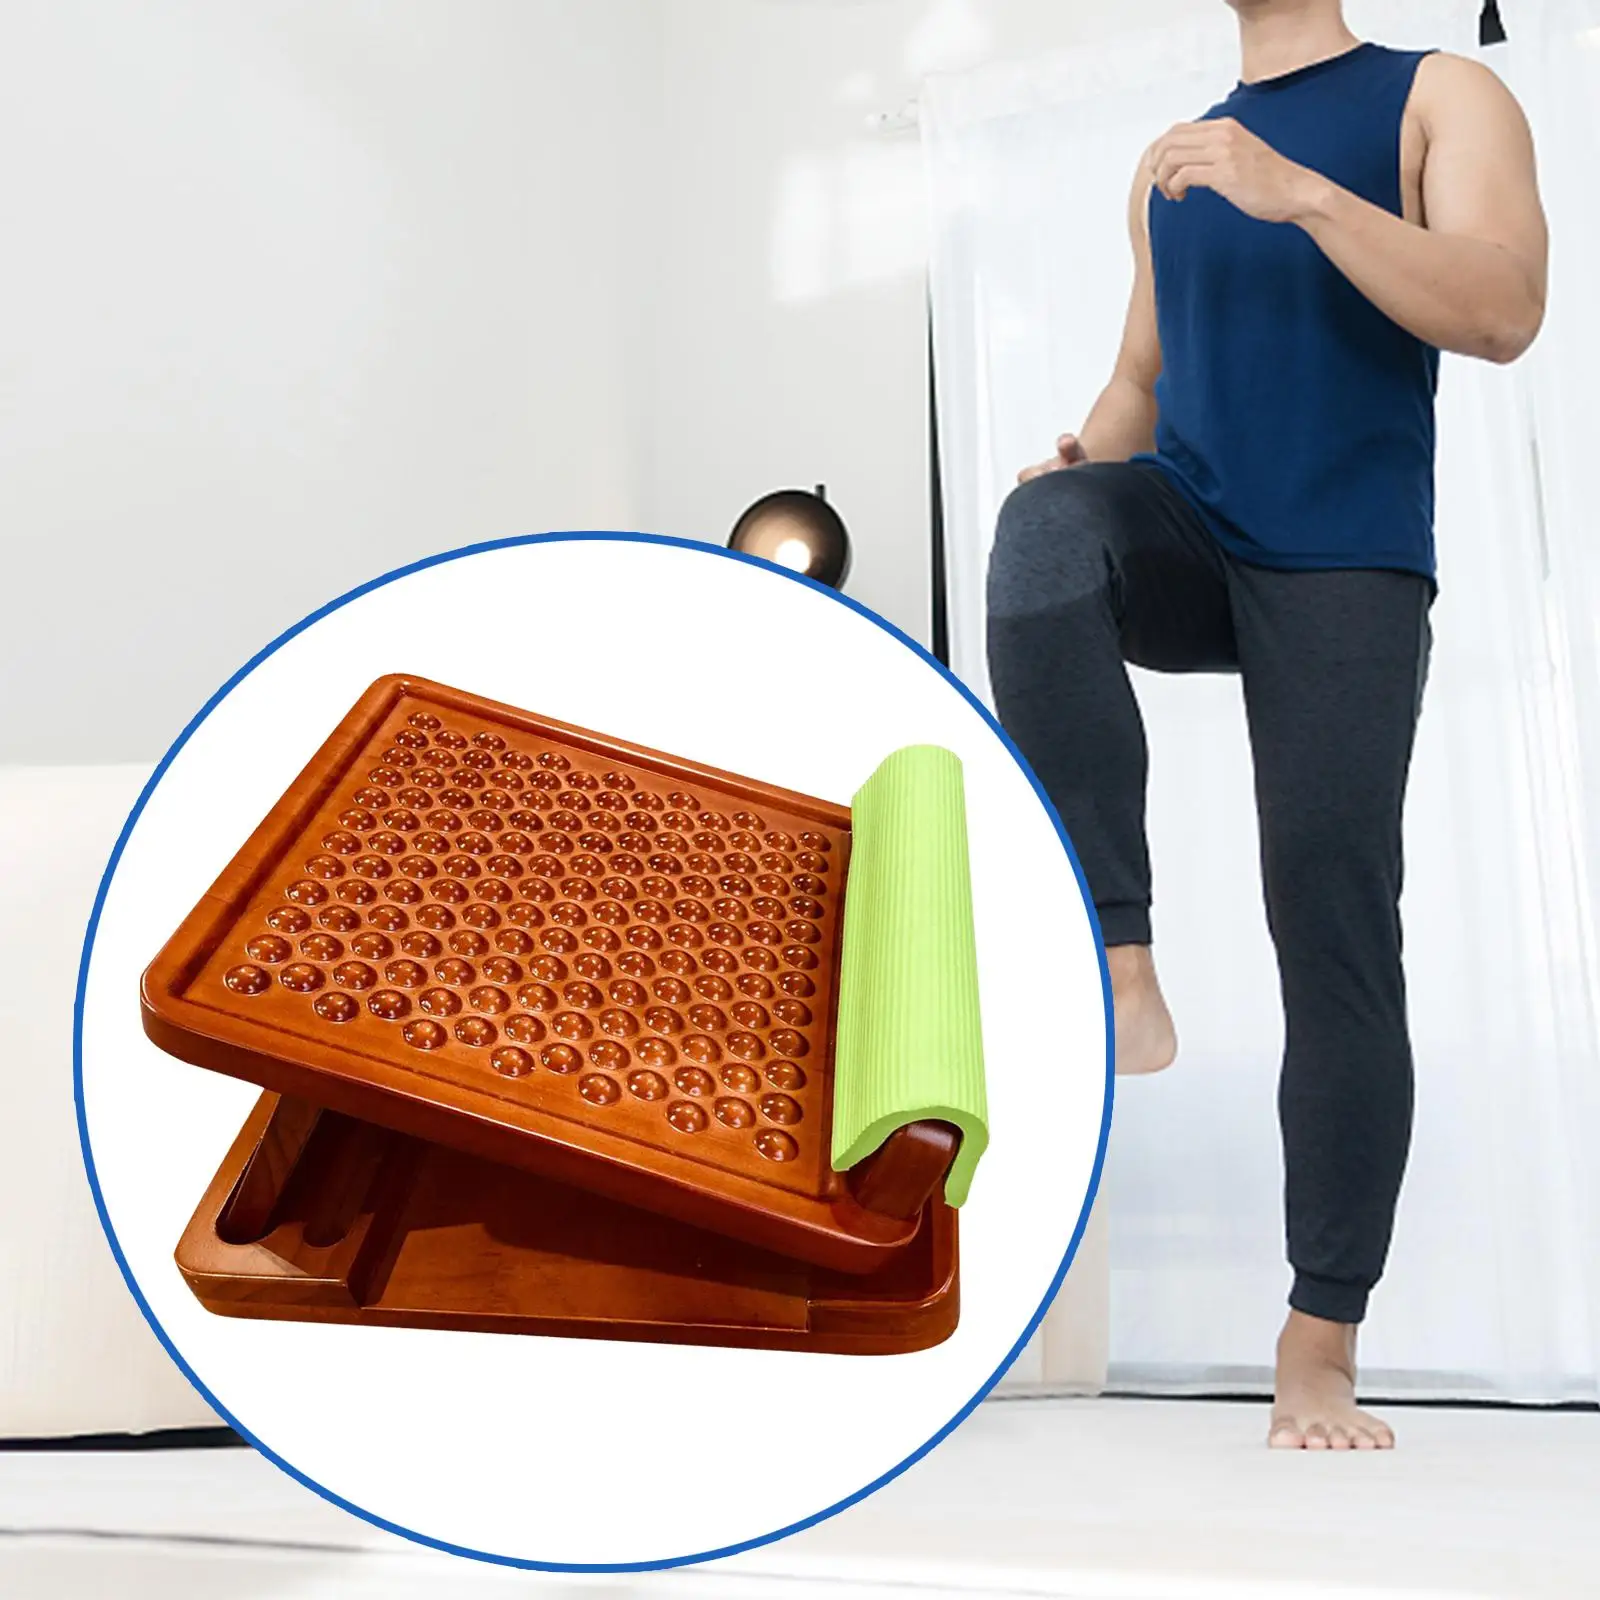 Solid Wood Slant Board Incline Board Balancing Fitness Pedal Nonslip for Ankle